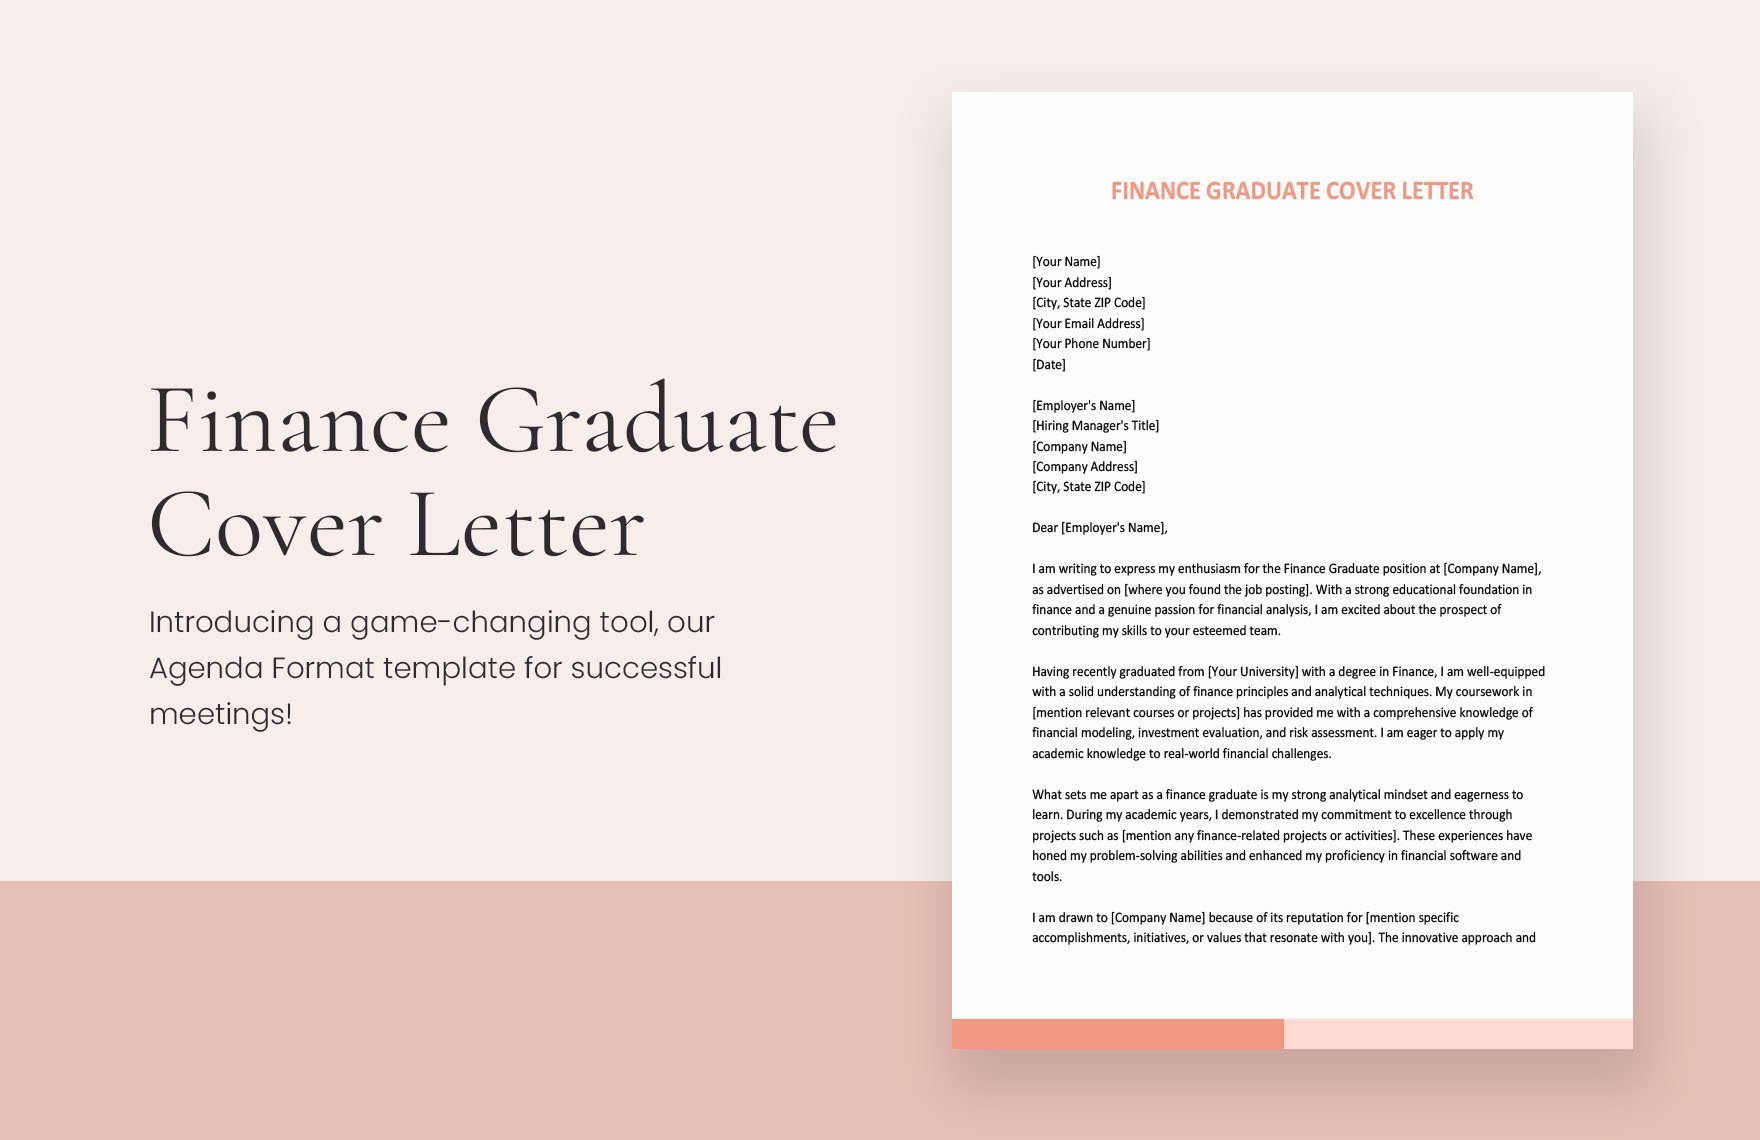 Finance Graduate Cover Letter in Word, Google Docs